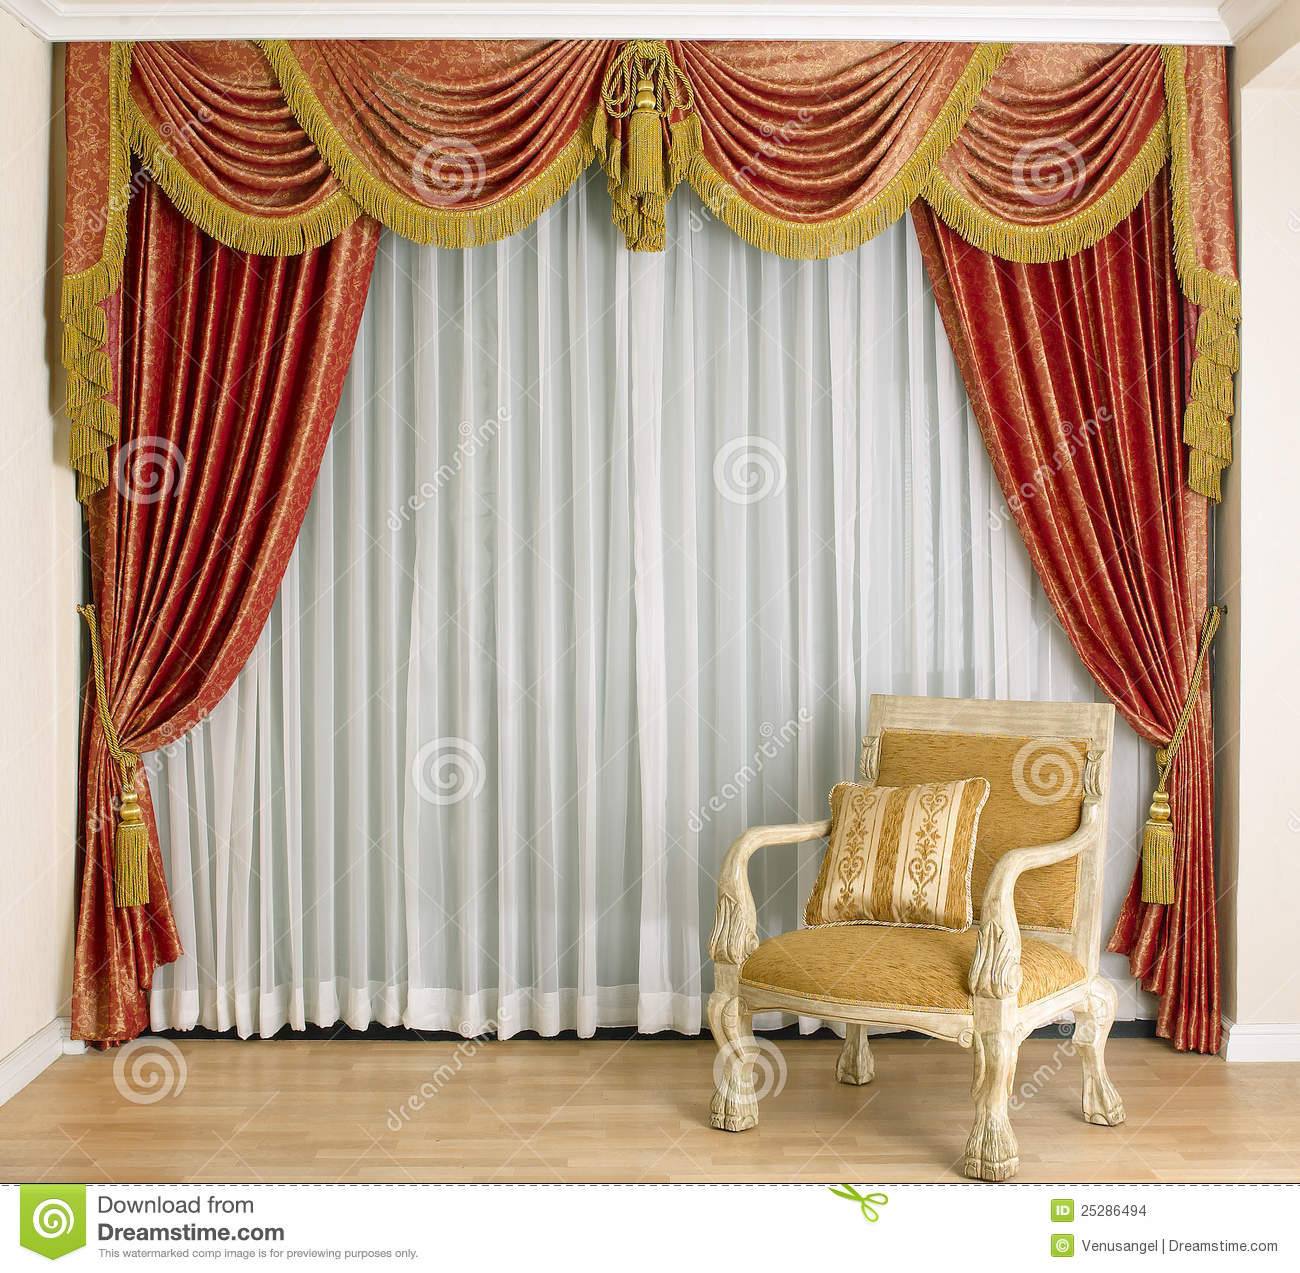 Beautiful Curtains For Living Room
 Beautiful Curtain In Living Room Stock Image of